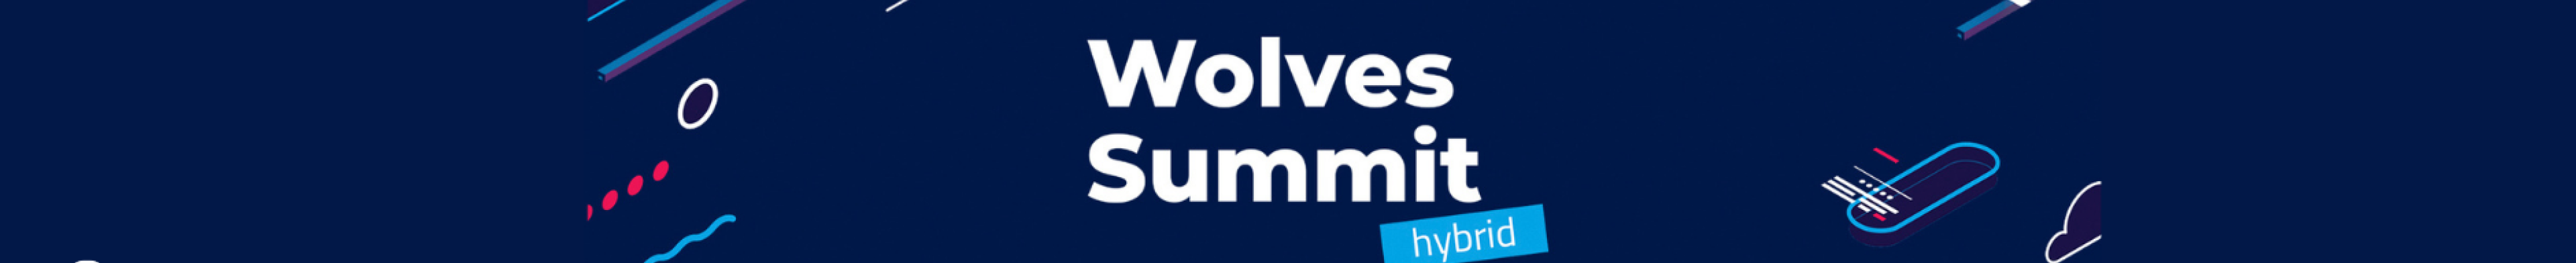 banner-wolves-summit-call_1.png